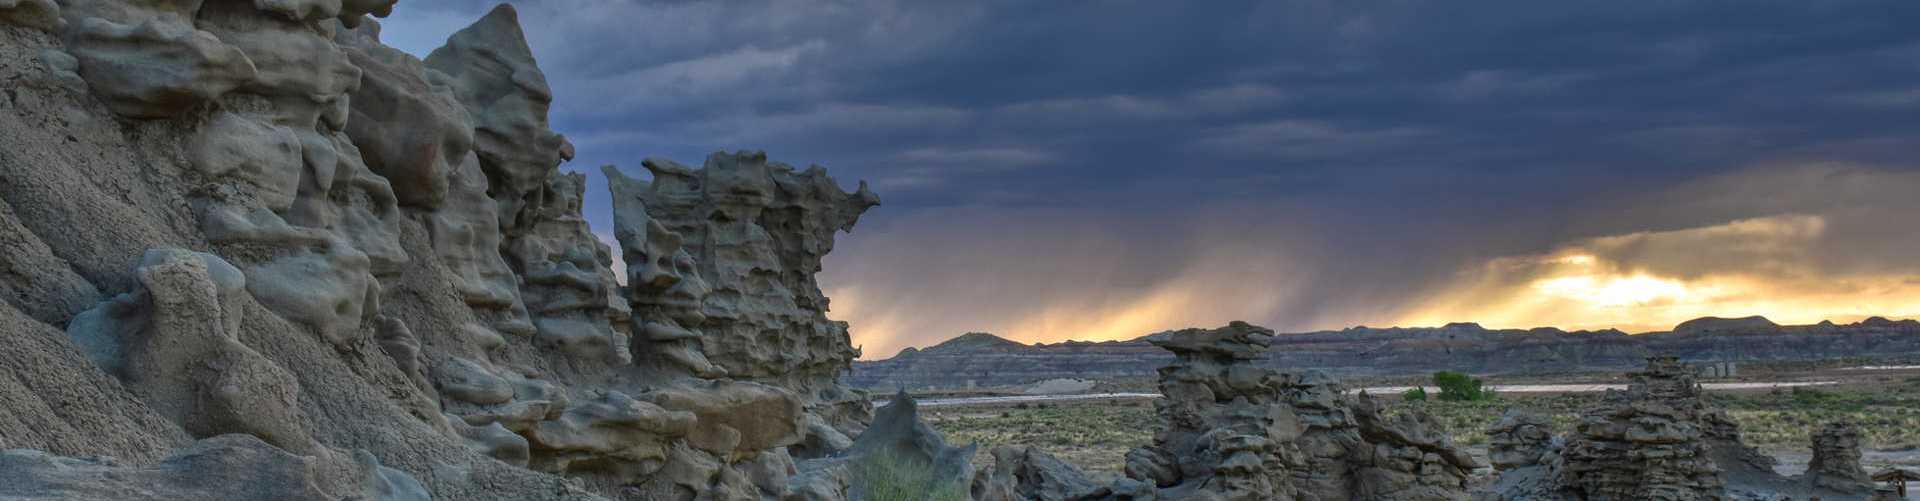 Terms of Use Banner - An image of a scenic Utah landscape with large gray formations